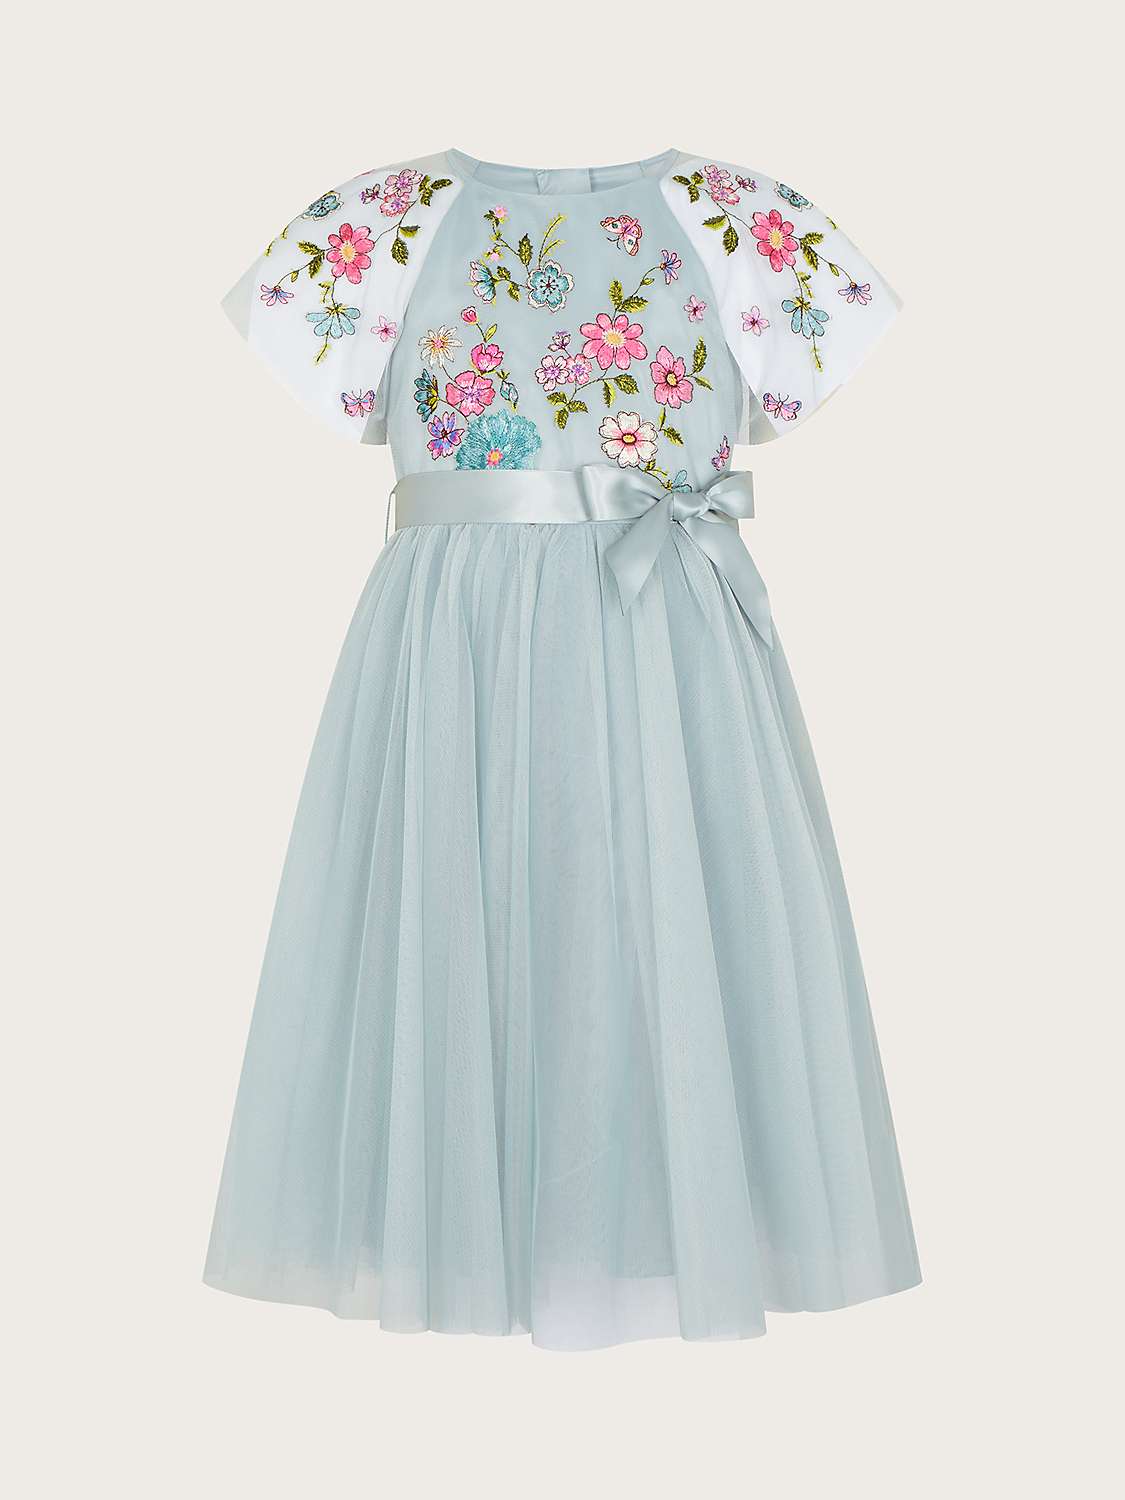 Buy Monsoon Kids' Emzy Cape Sleeve Embroidered Dress, Green/Multi Online at johnlewis.com